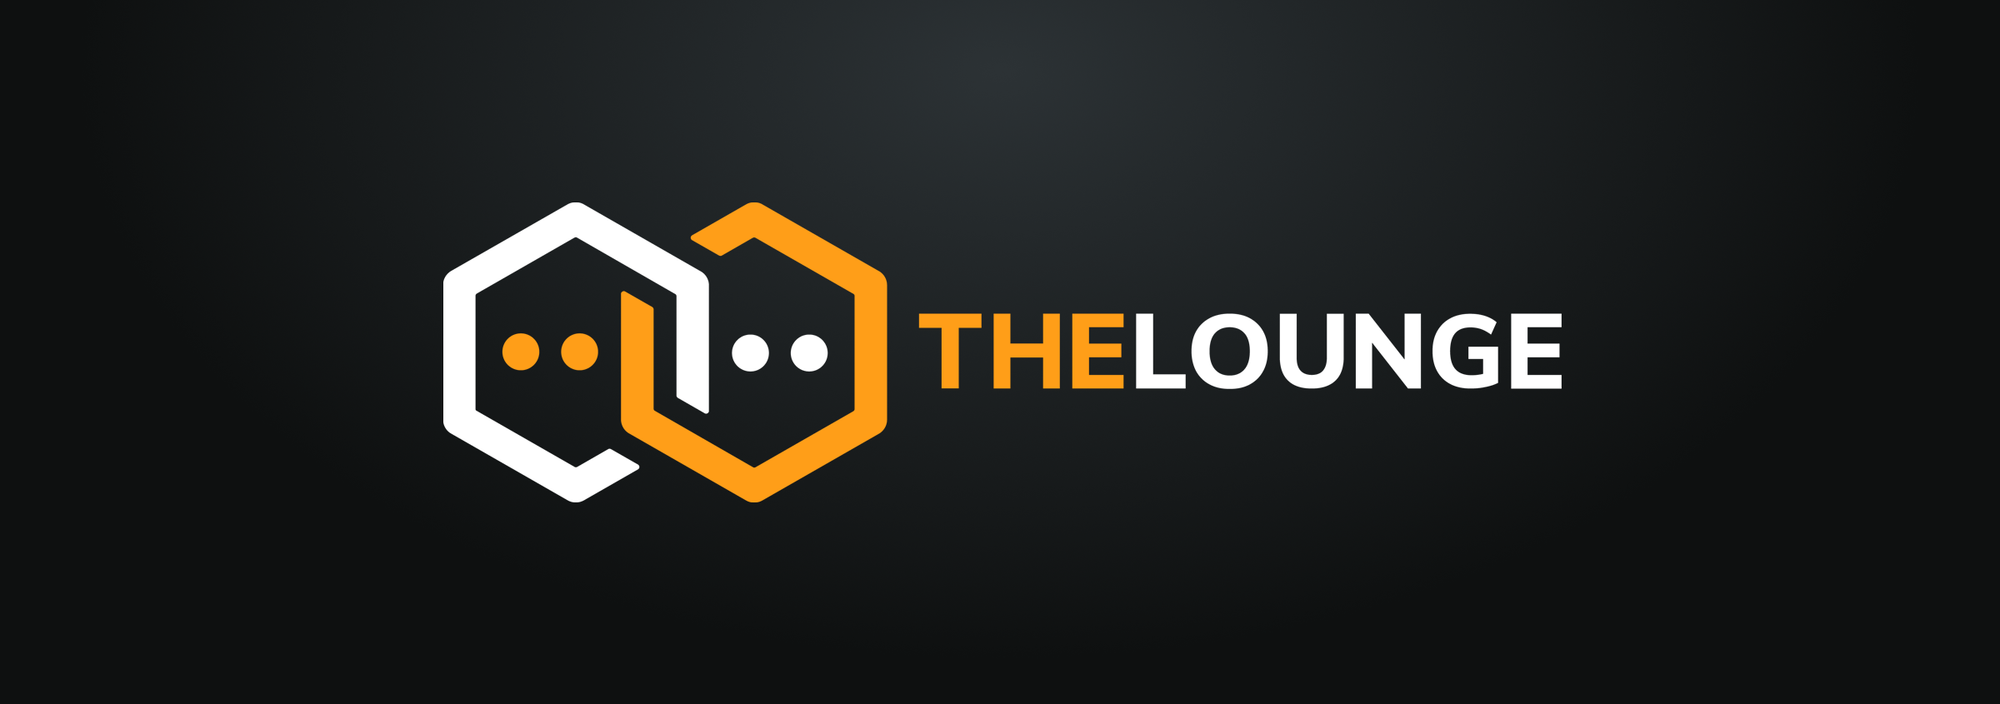 The Lounge: The self-hosted web IRC client